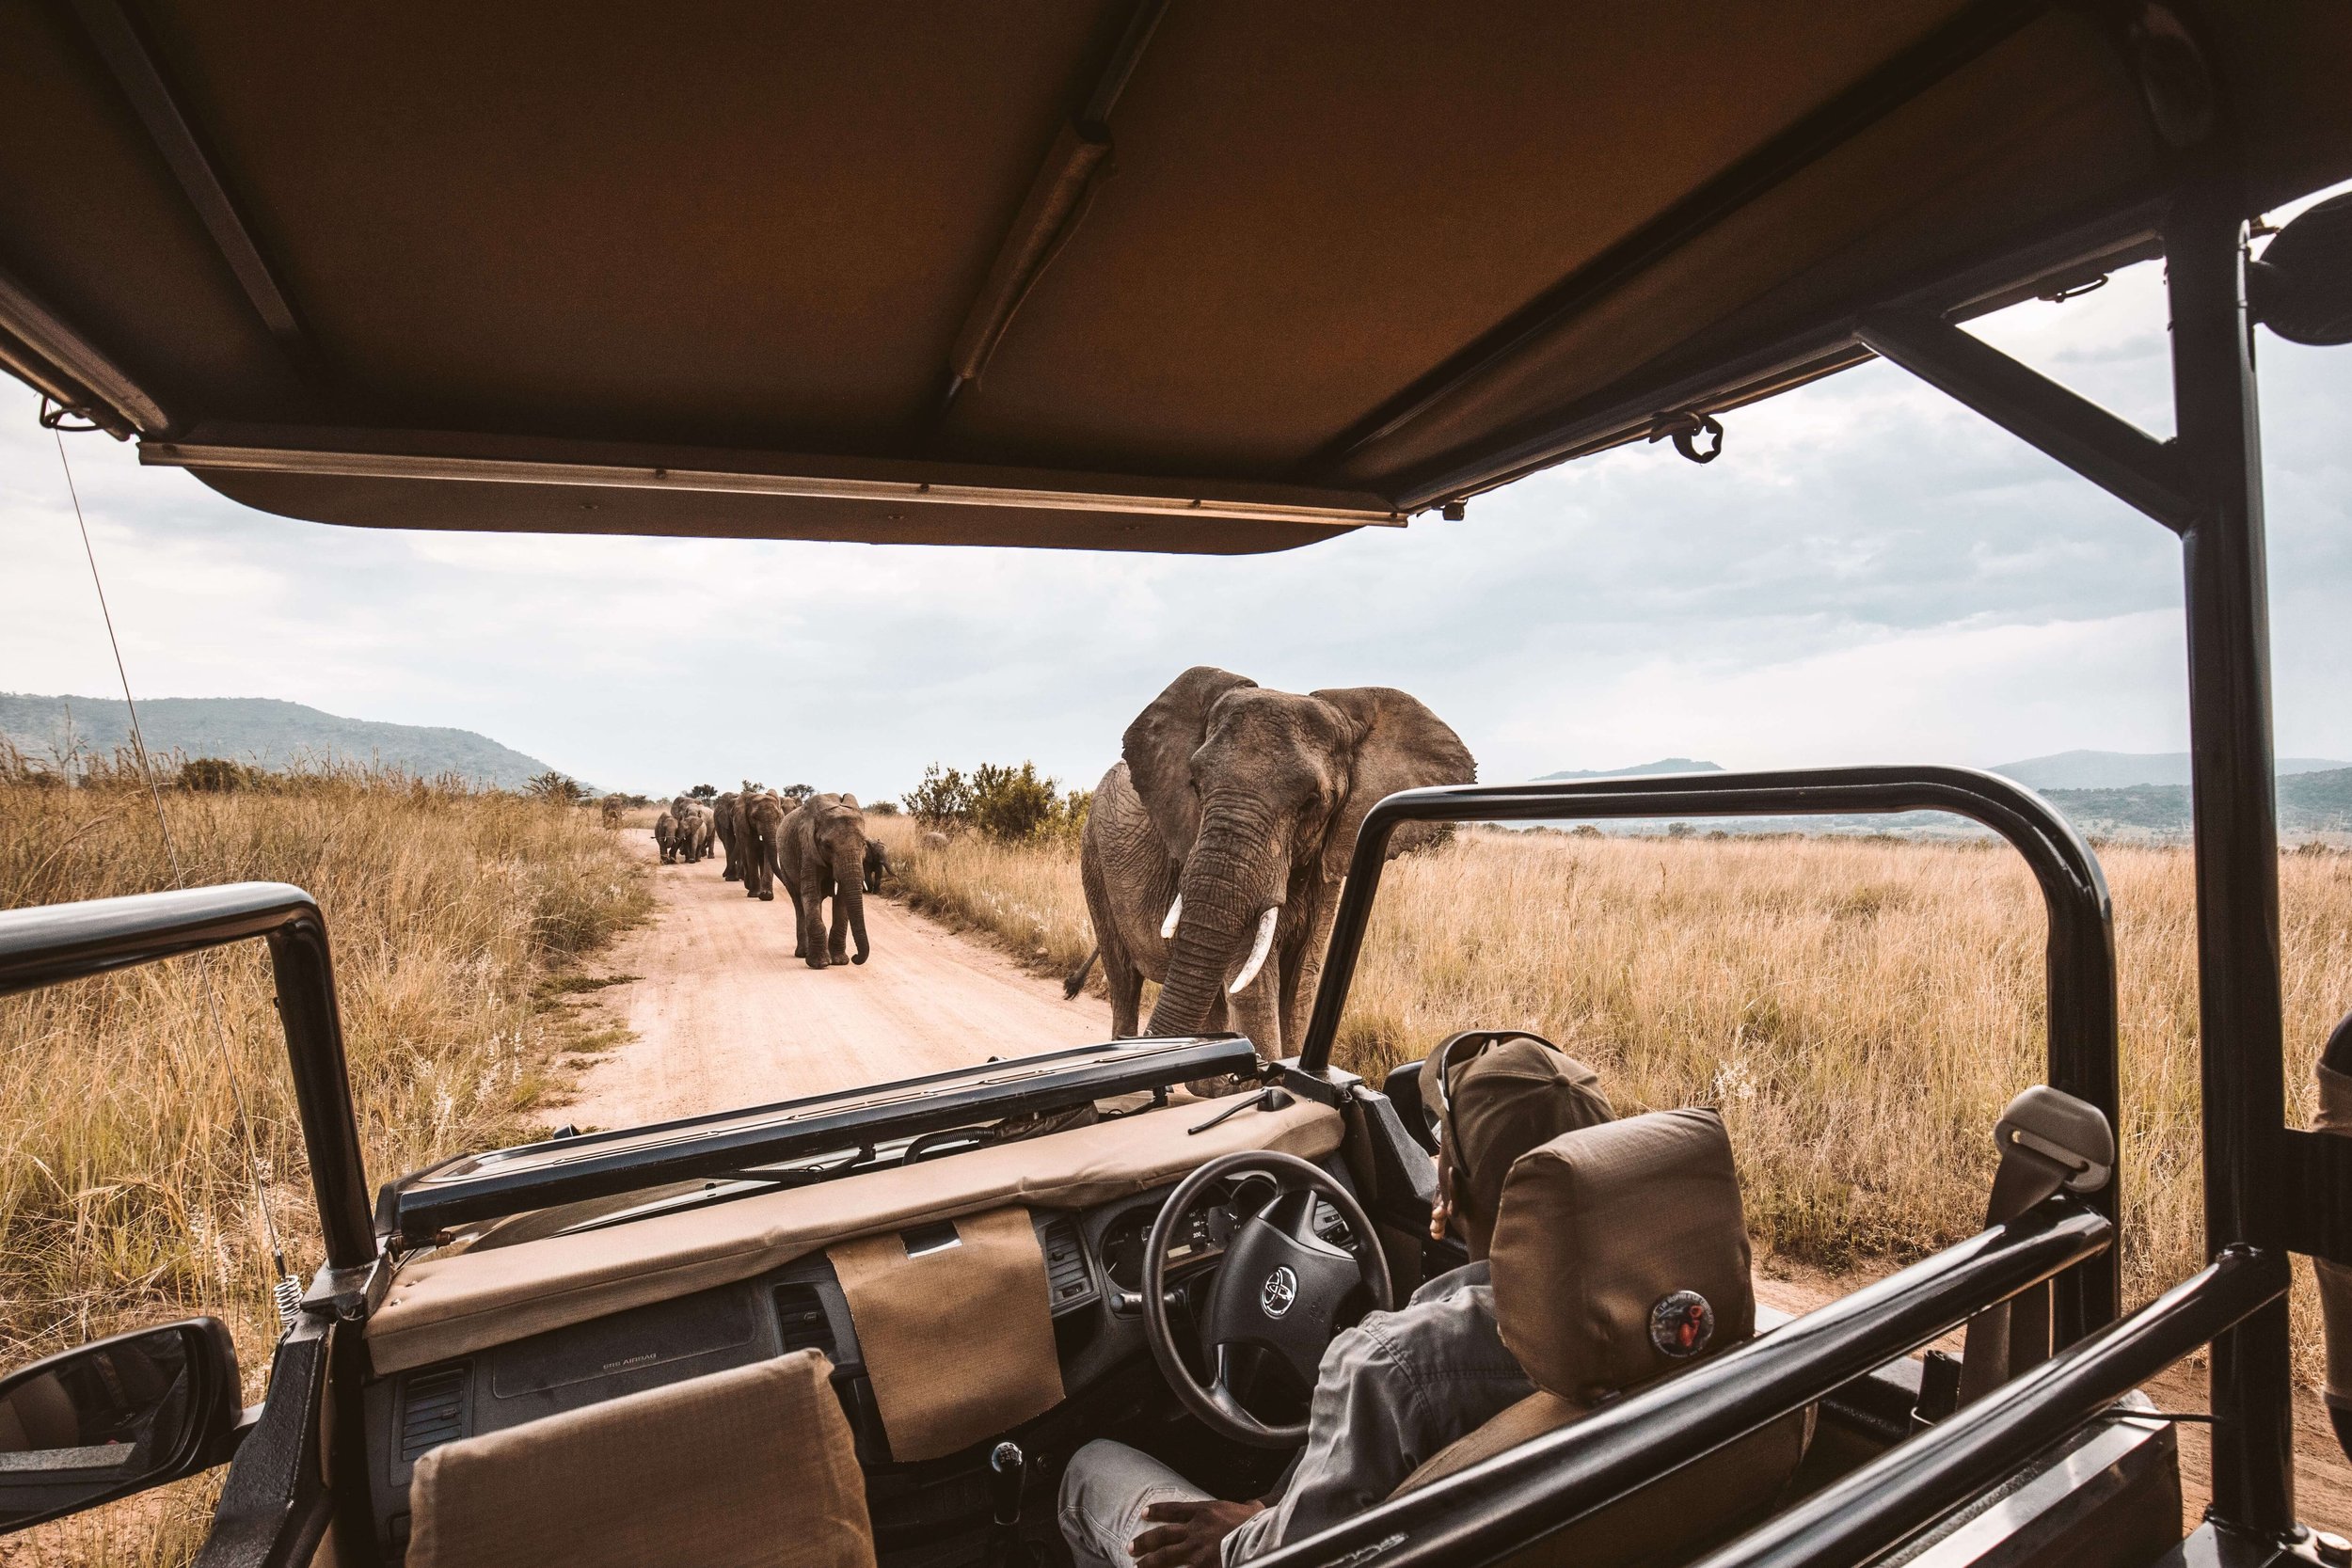 A row of elephants walking in front of a safari vehicle operated by a professional safari guide